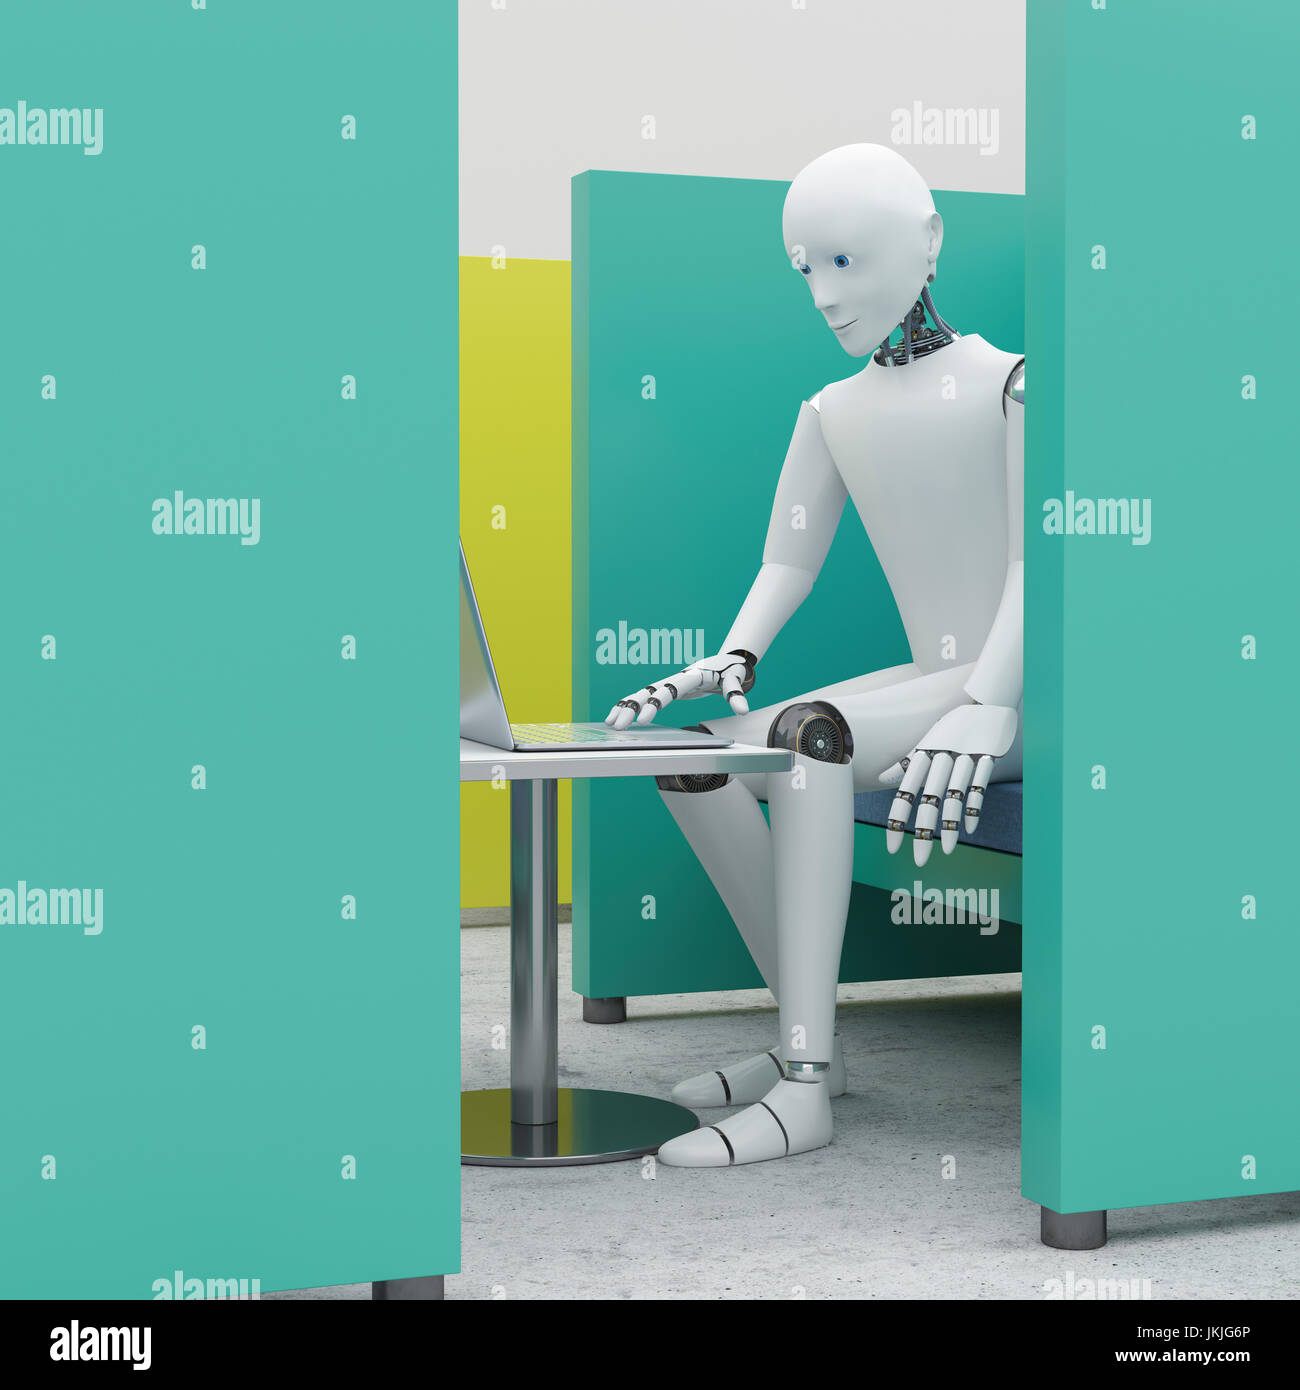 Robot using laptop in office cubicle, 3d rendering Stock Photo